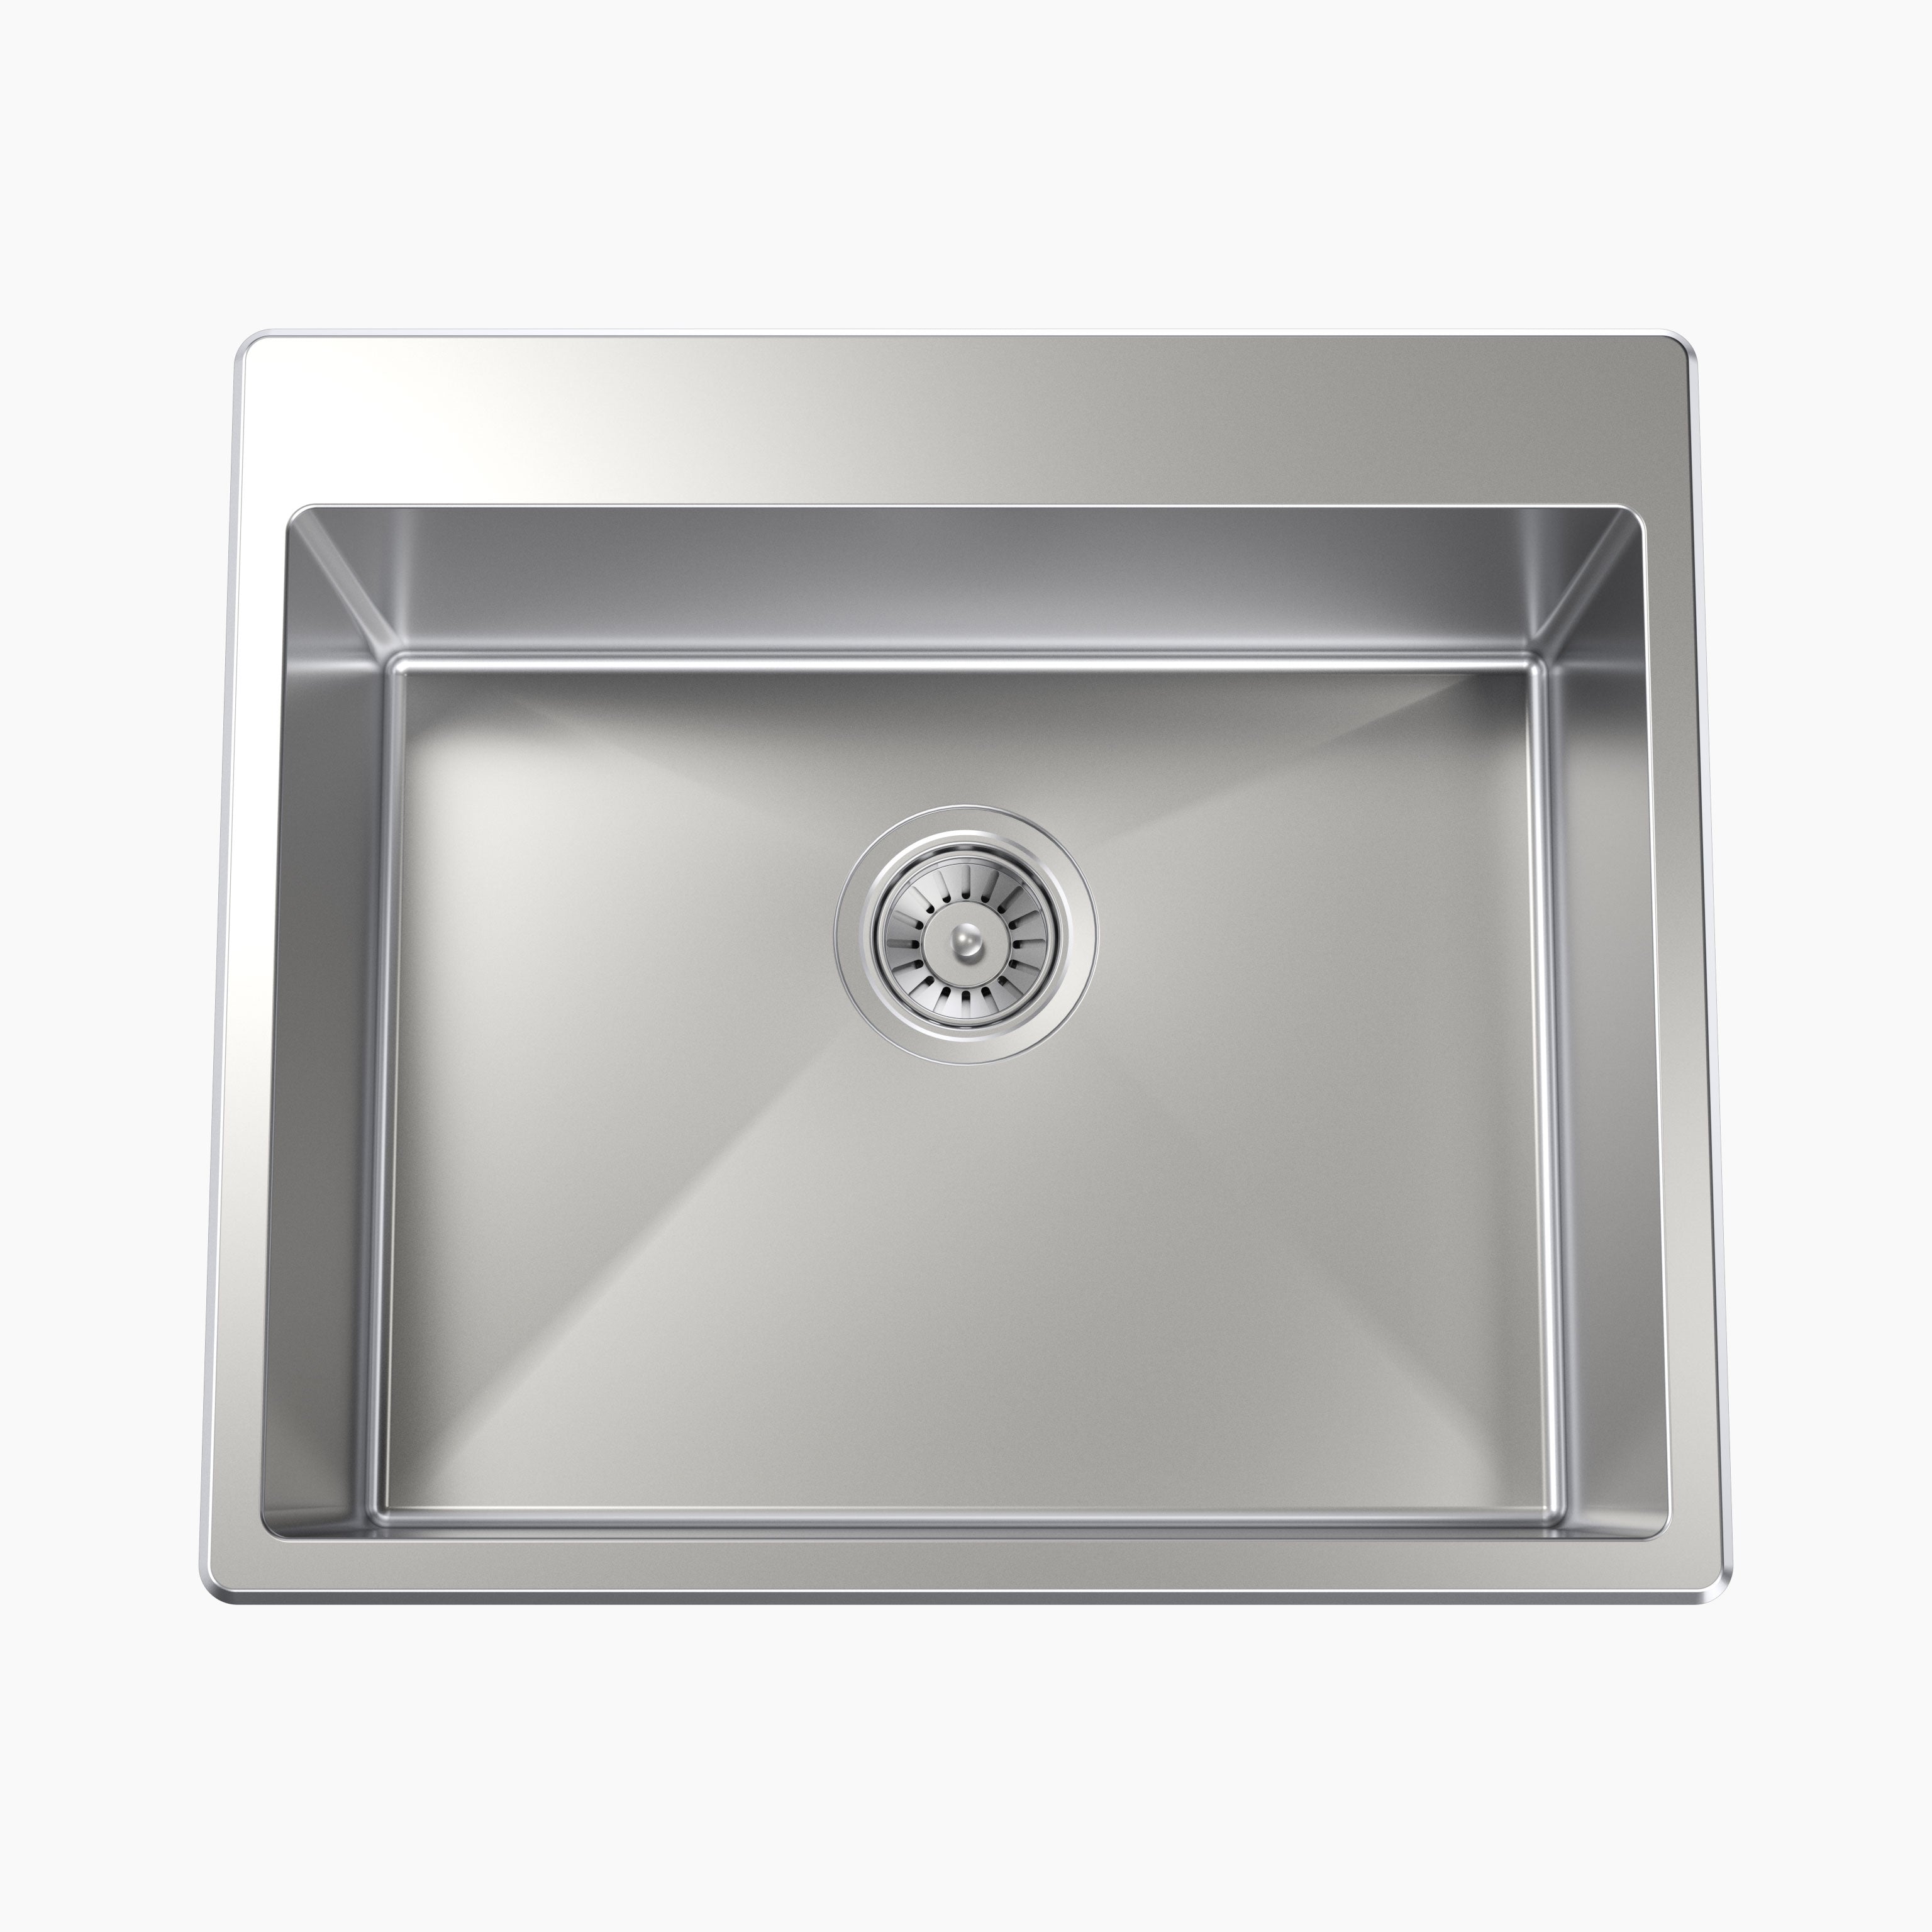 Square 45L Laundry Sink 0TH